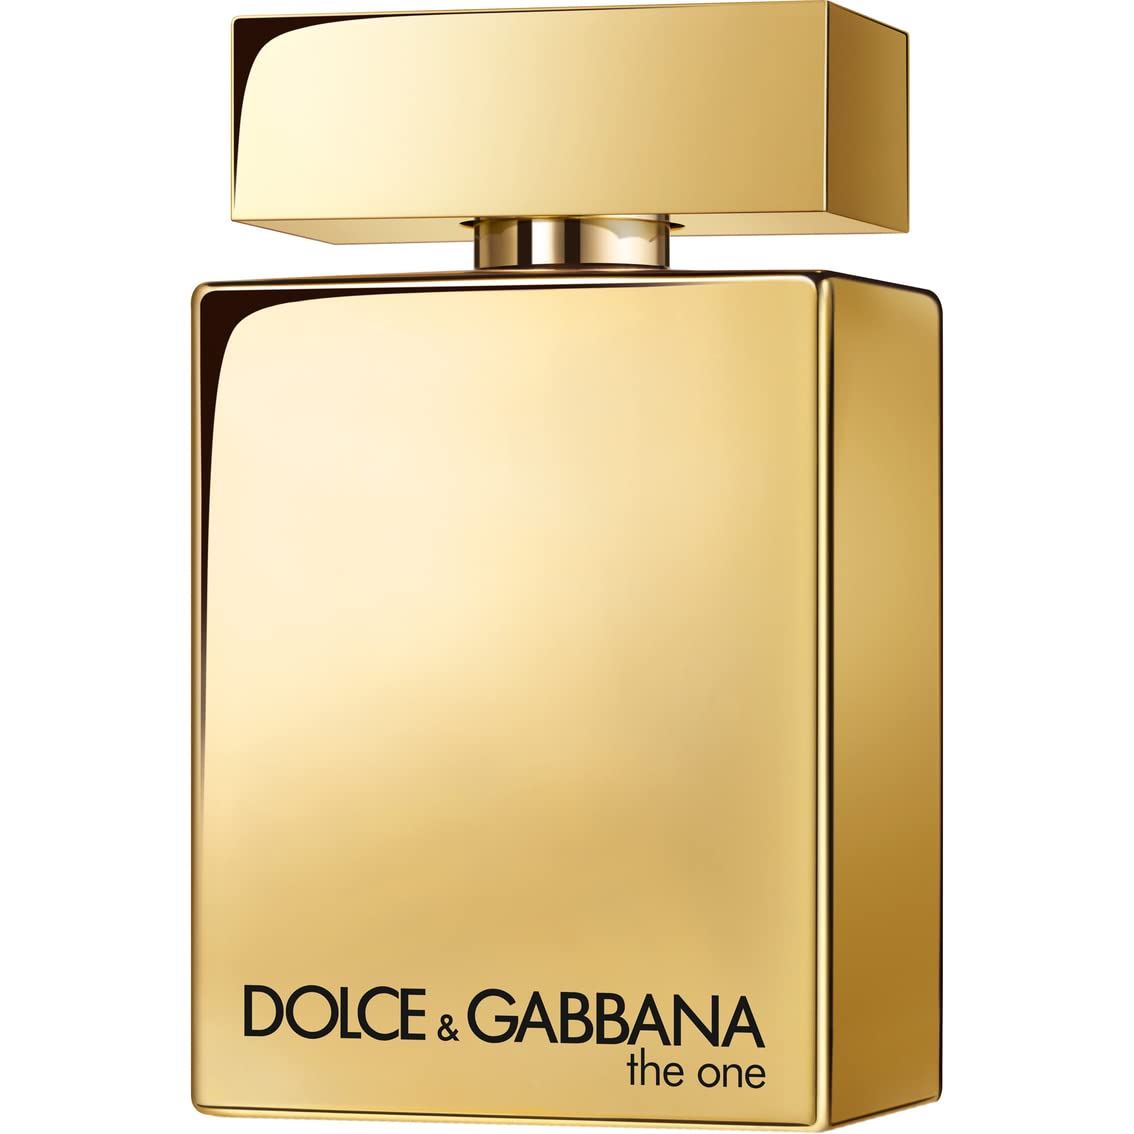 Dolce & Gabbana The One Gold for Men Eau de Parfum Spray, 3.3 Ounce Available at Best Prices😍 VISIT STORE🛒: bit.ly/3YazqWD #dolcegabbana #gucci #fashion #chanel #versace #dior #prada #louisvuitton #thecosmeticsmalls #dolcegabbanaperfume #perfume #chanel